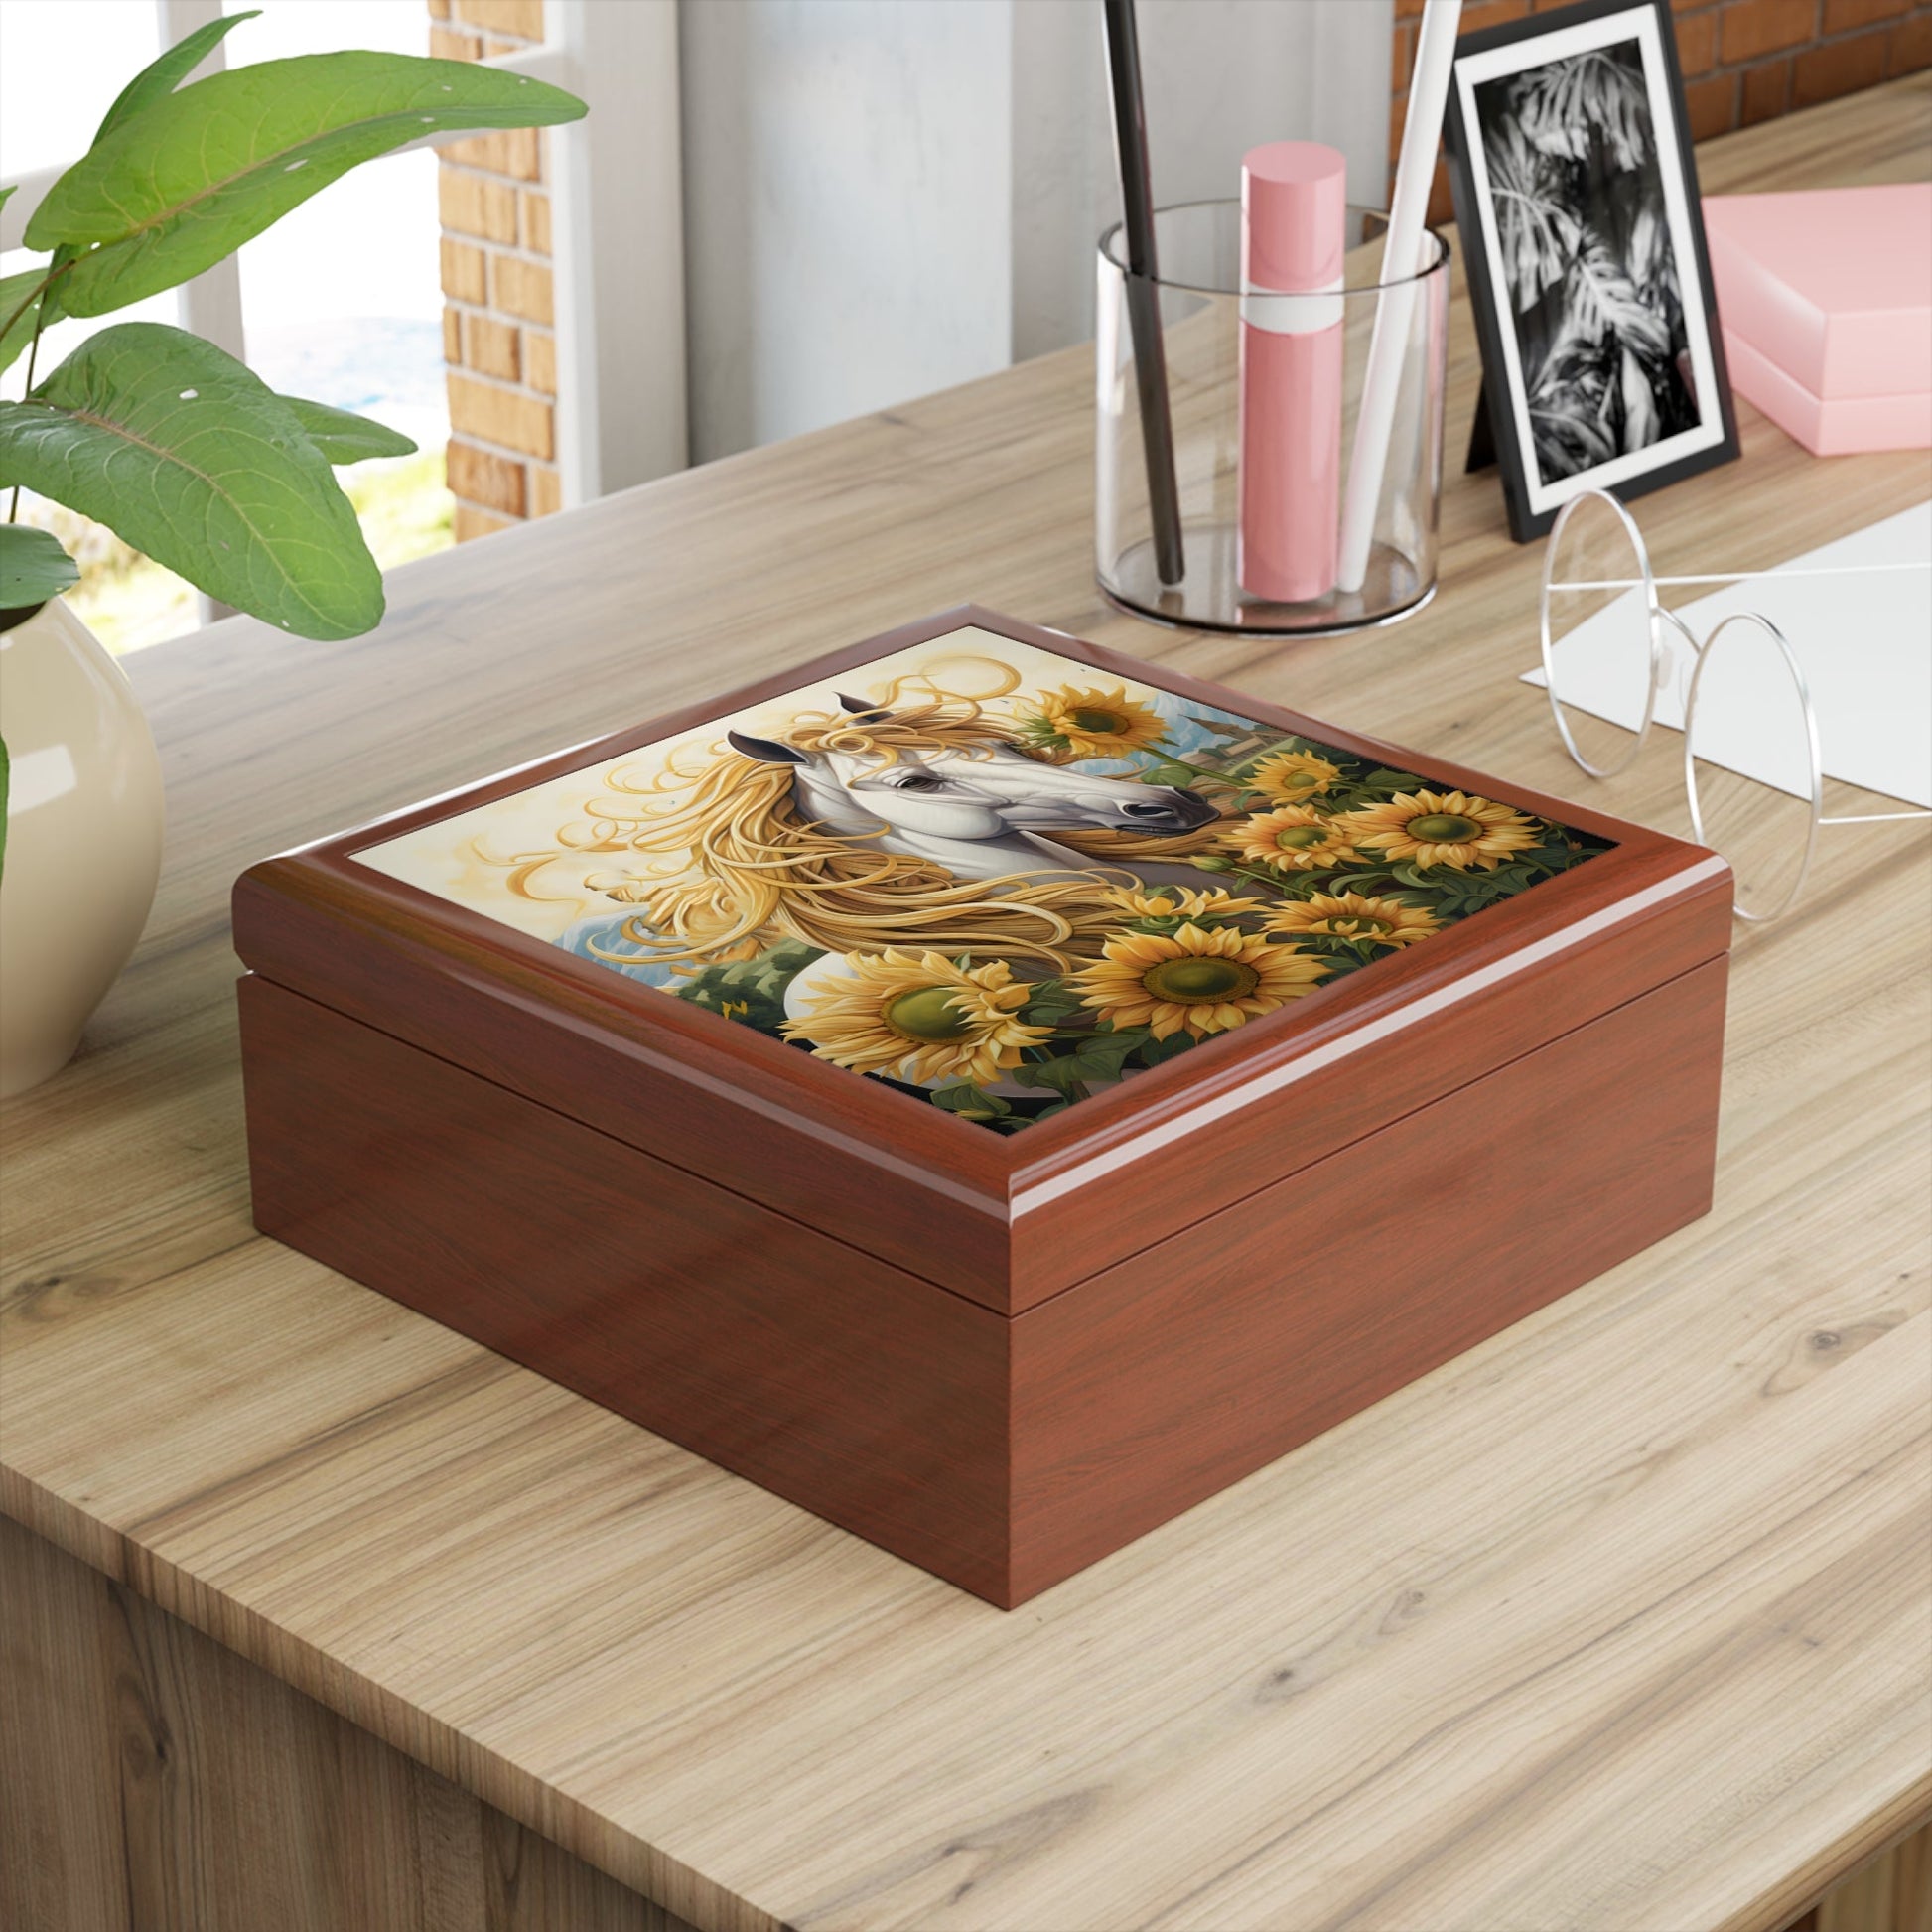 Unicorn with Sunflowers Subdued Colors Art Print Jewelry Box